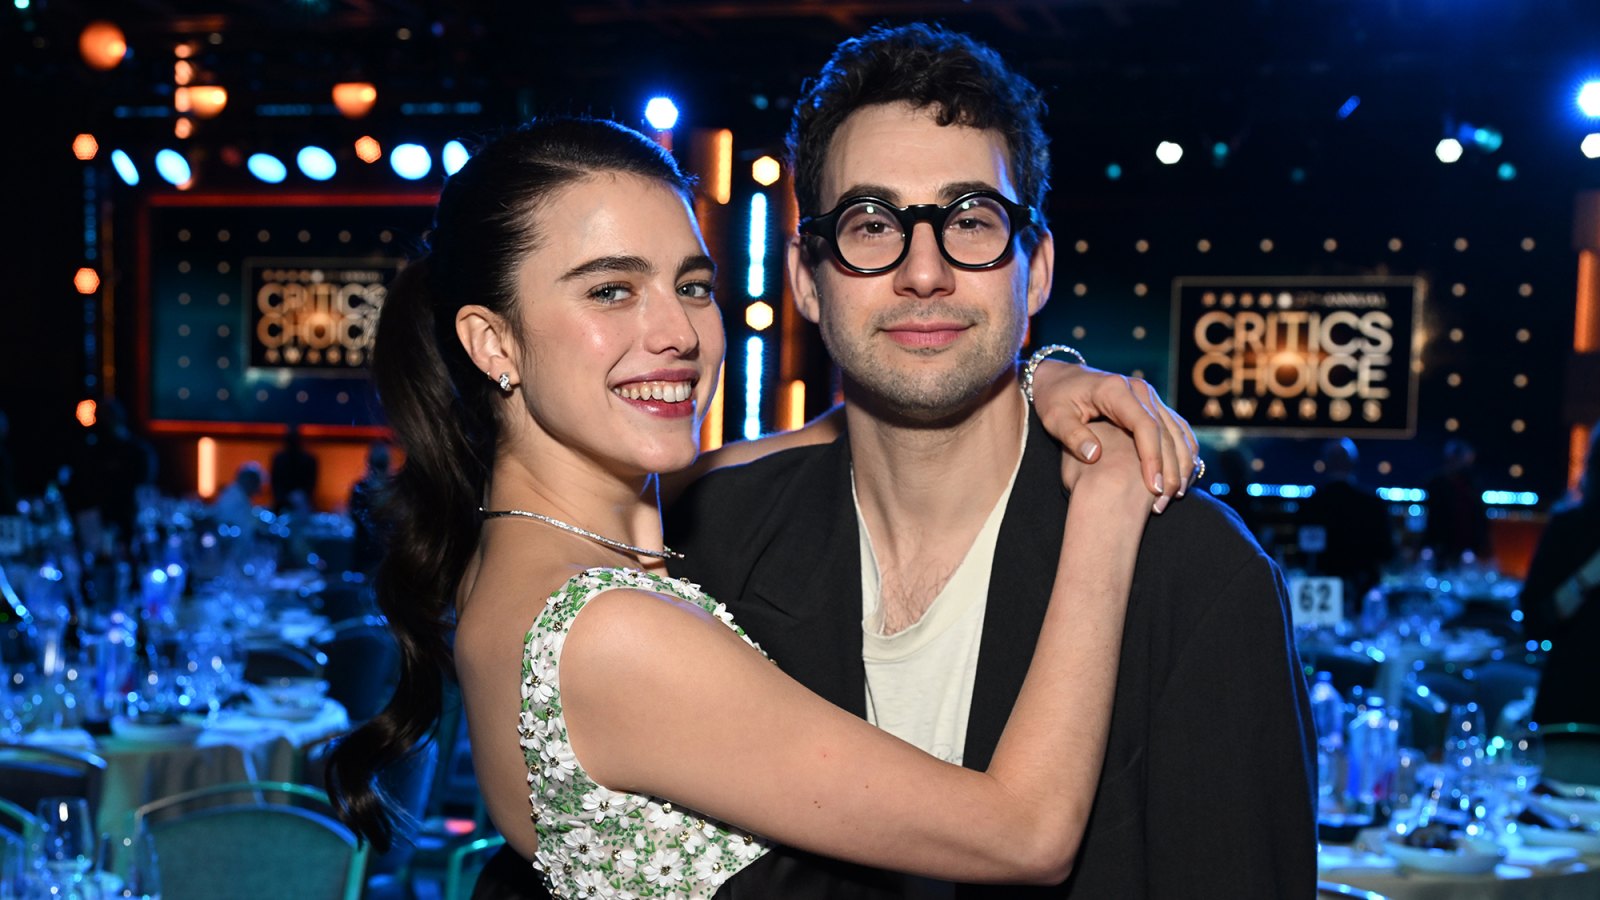 Jack Antonoff and Margaret Qualley Are Married, Say 'I Do' at Star-Studded NJ Wedding Ceremony